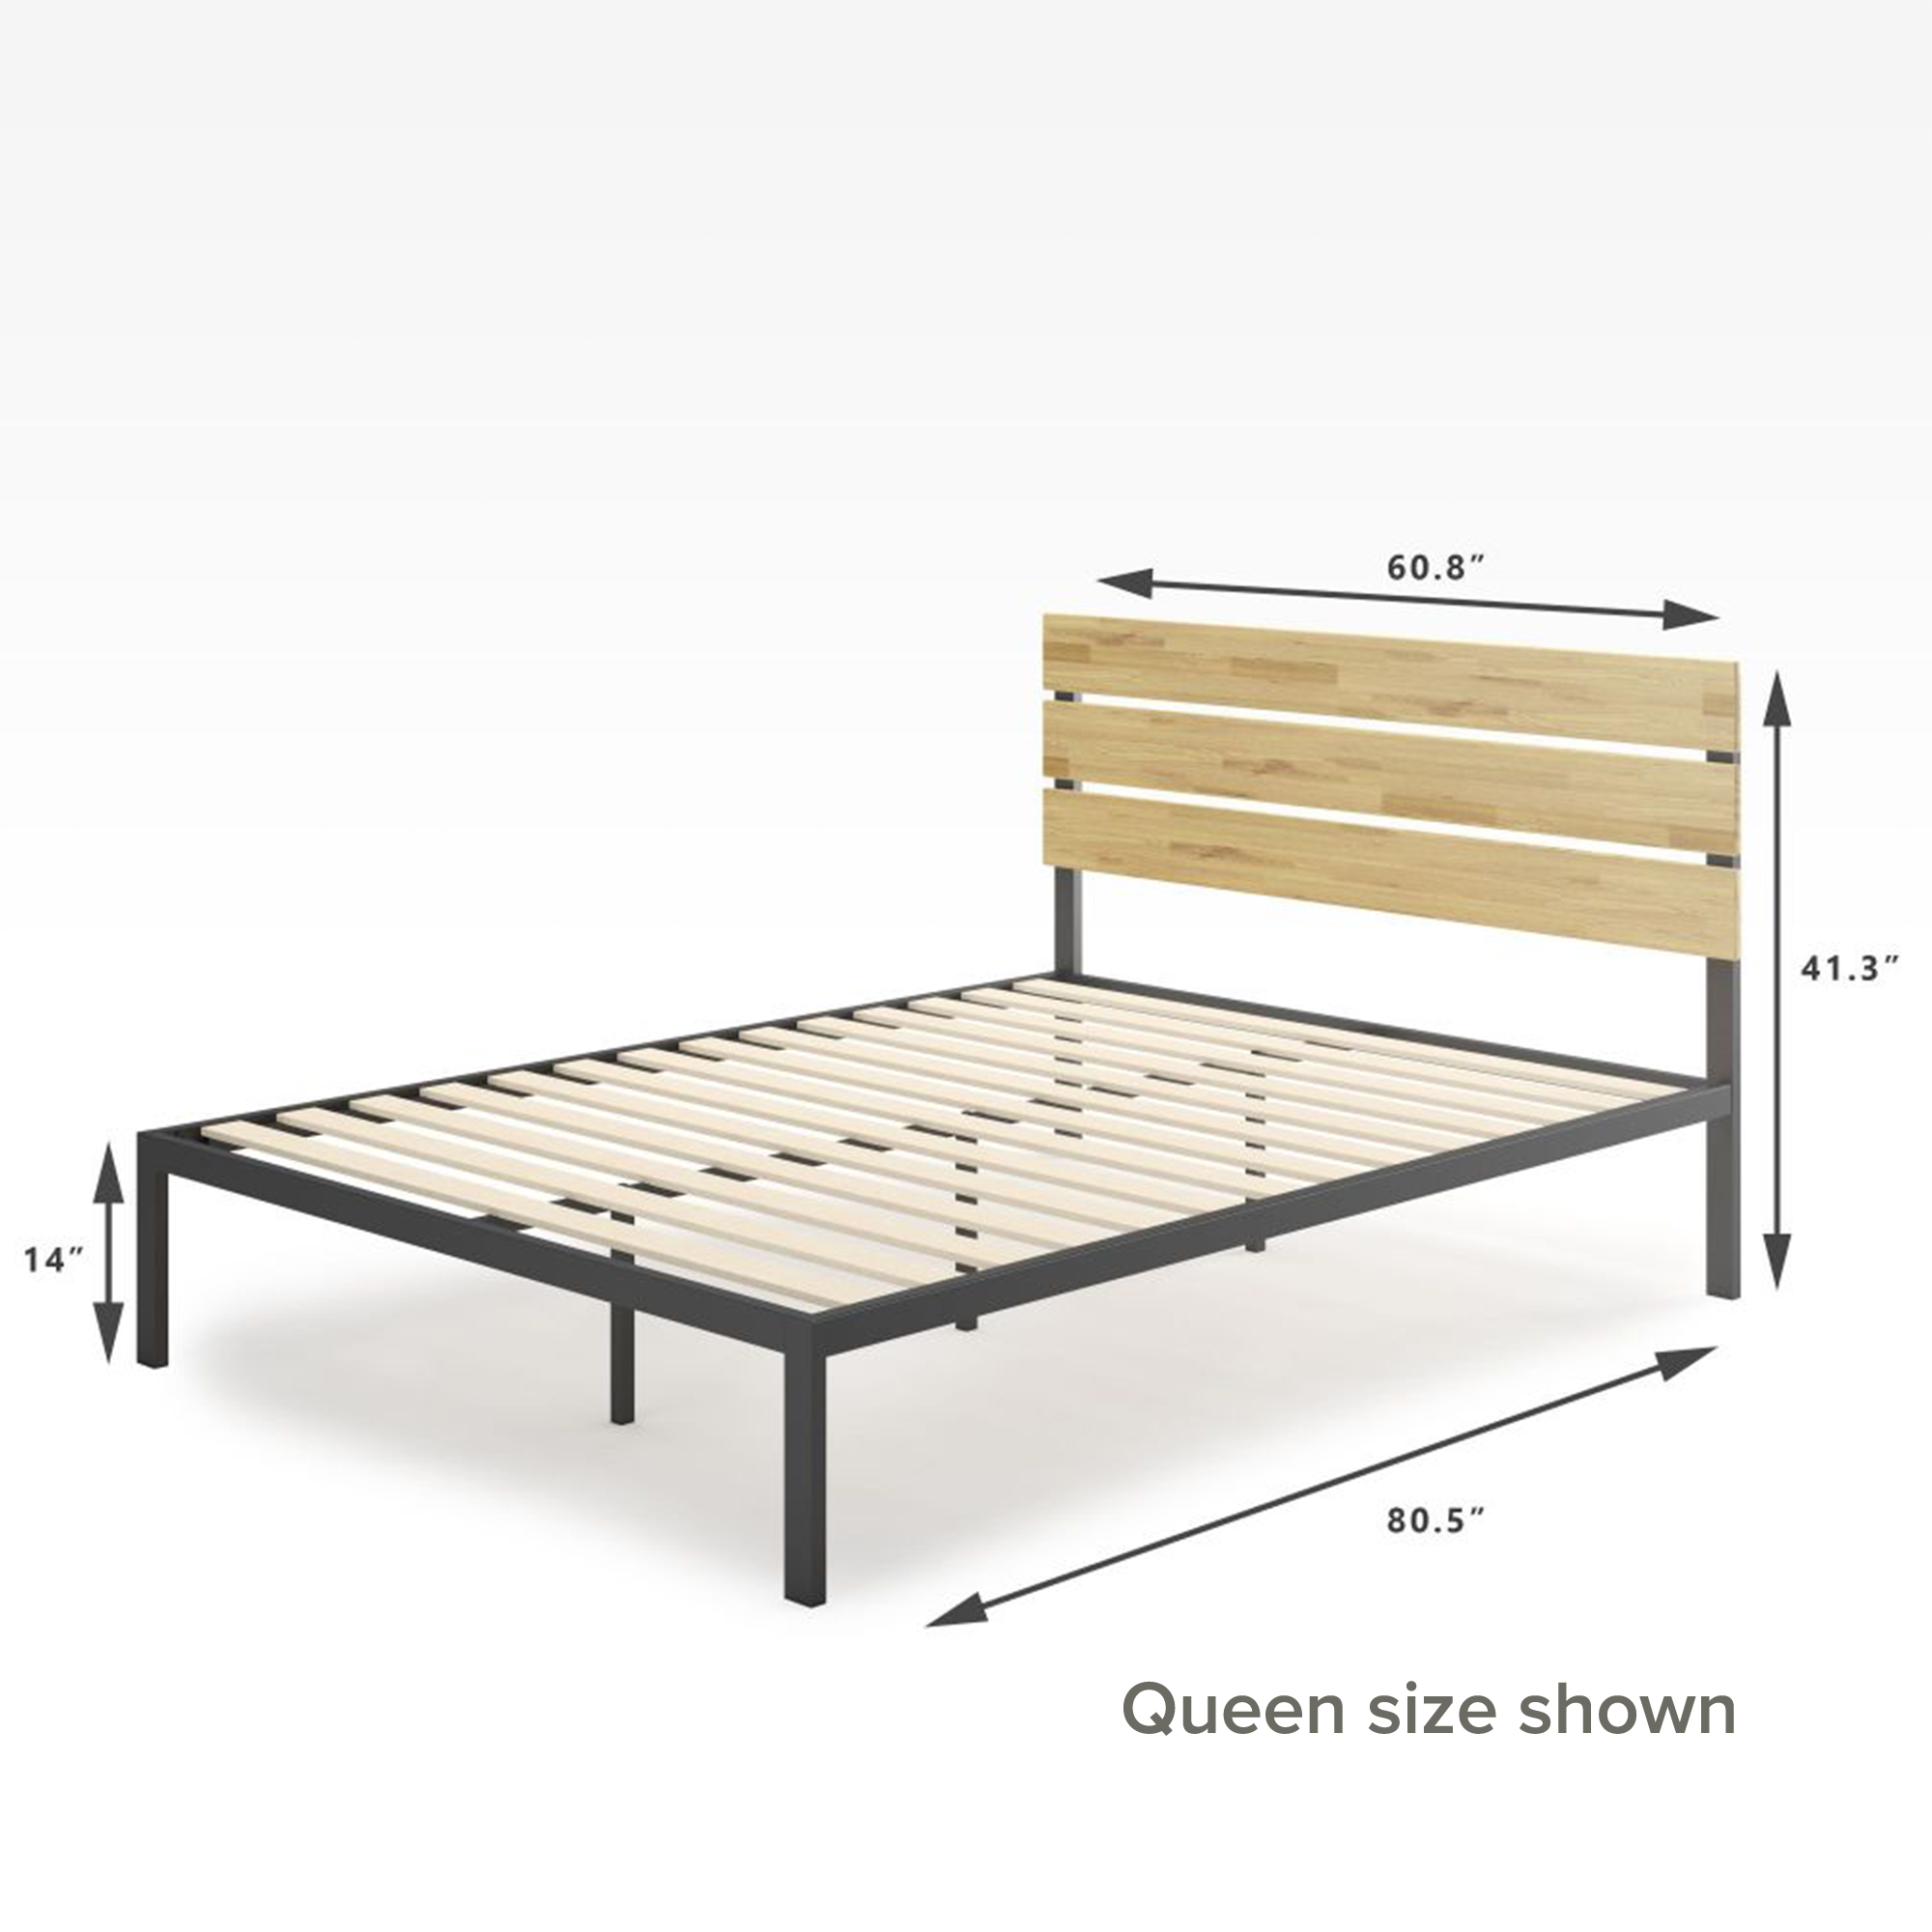 Paul Metal and Wood Platform Bed Frame Dimensions Queen Size Dimensions 